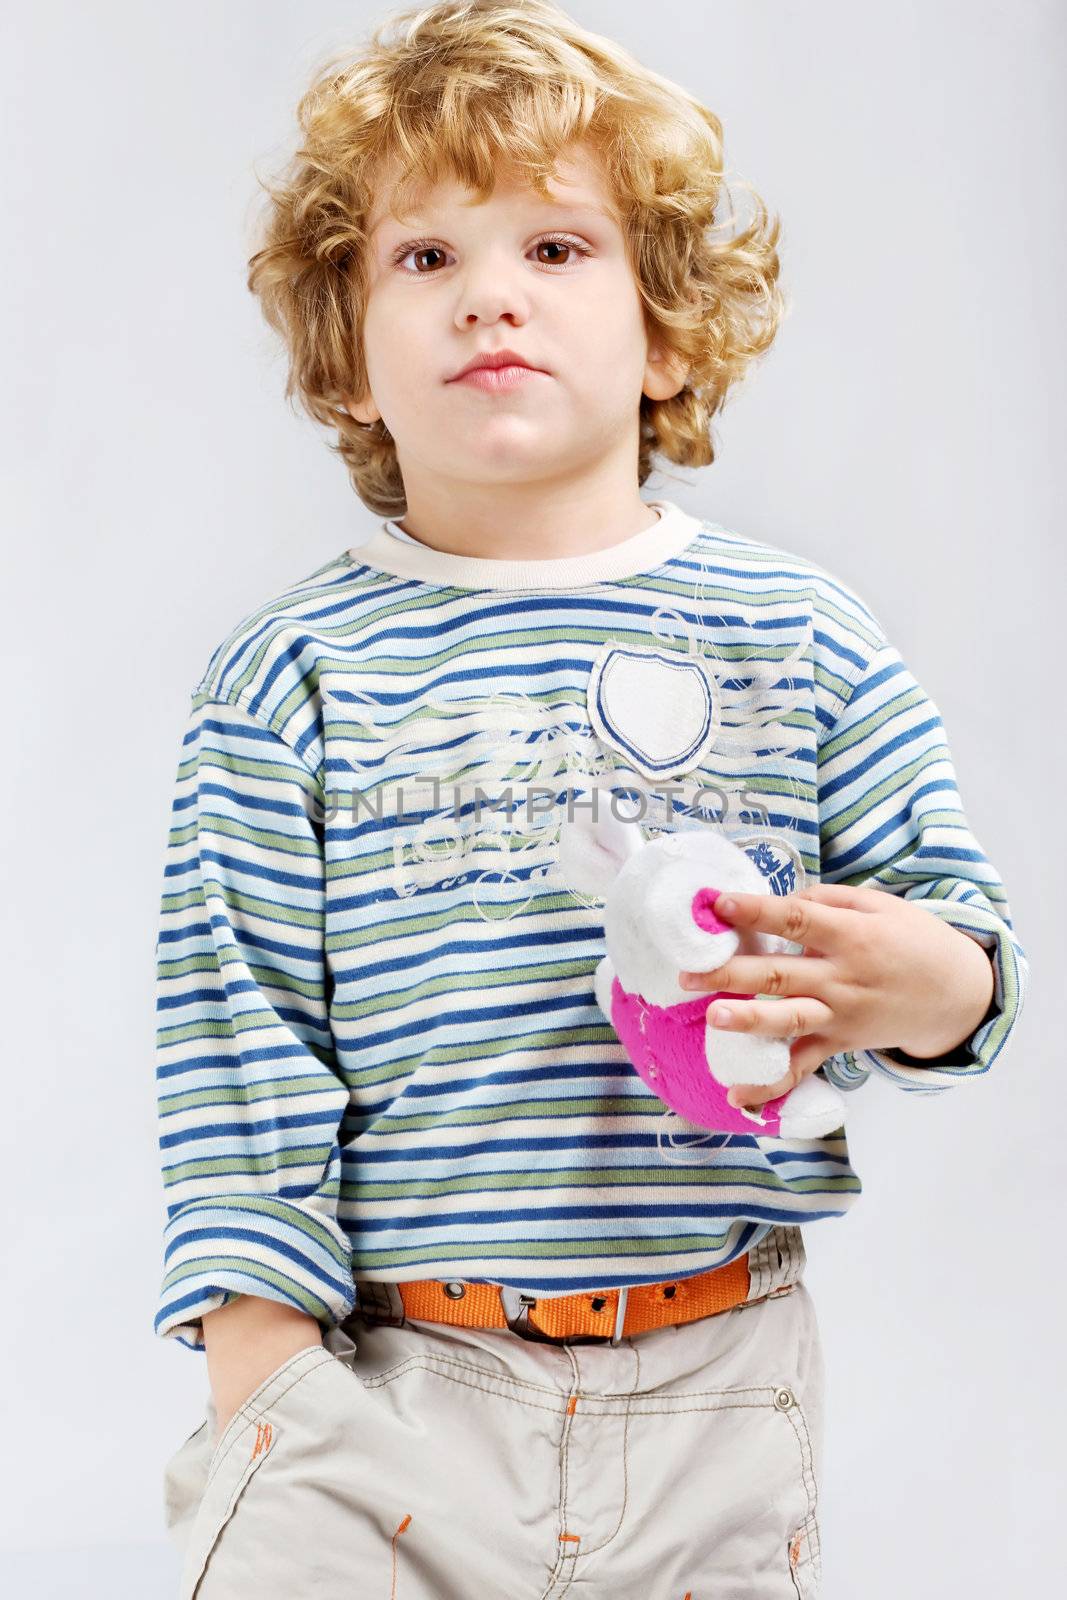 portrait of a male child with blue curl hair, holding toy and posing